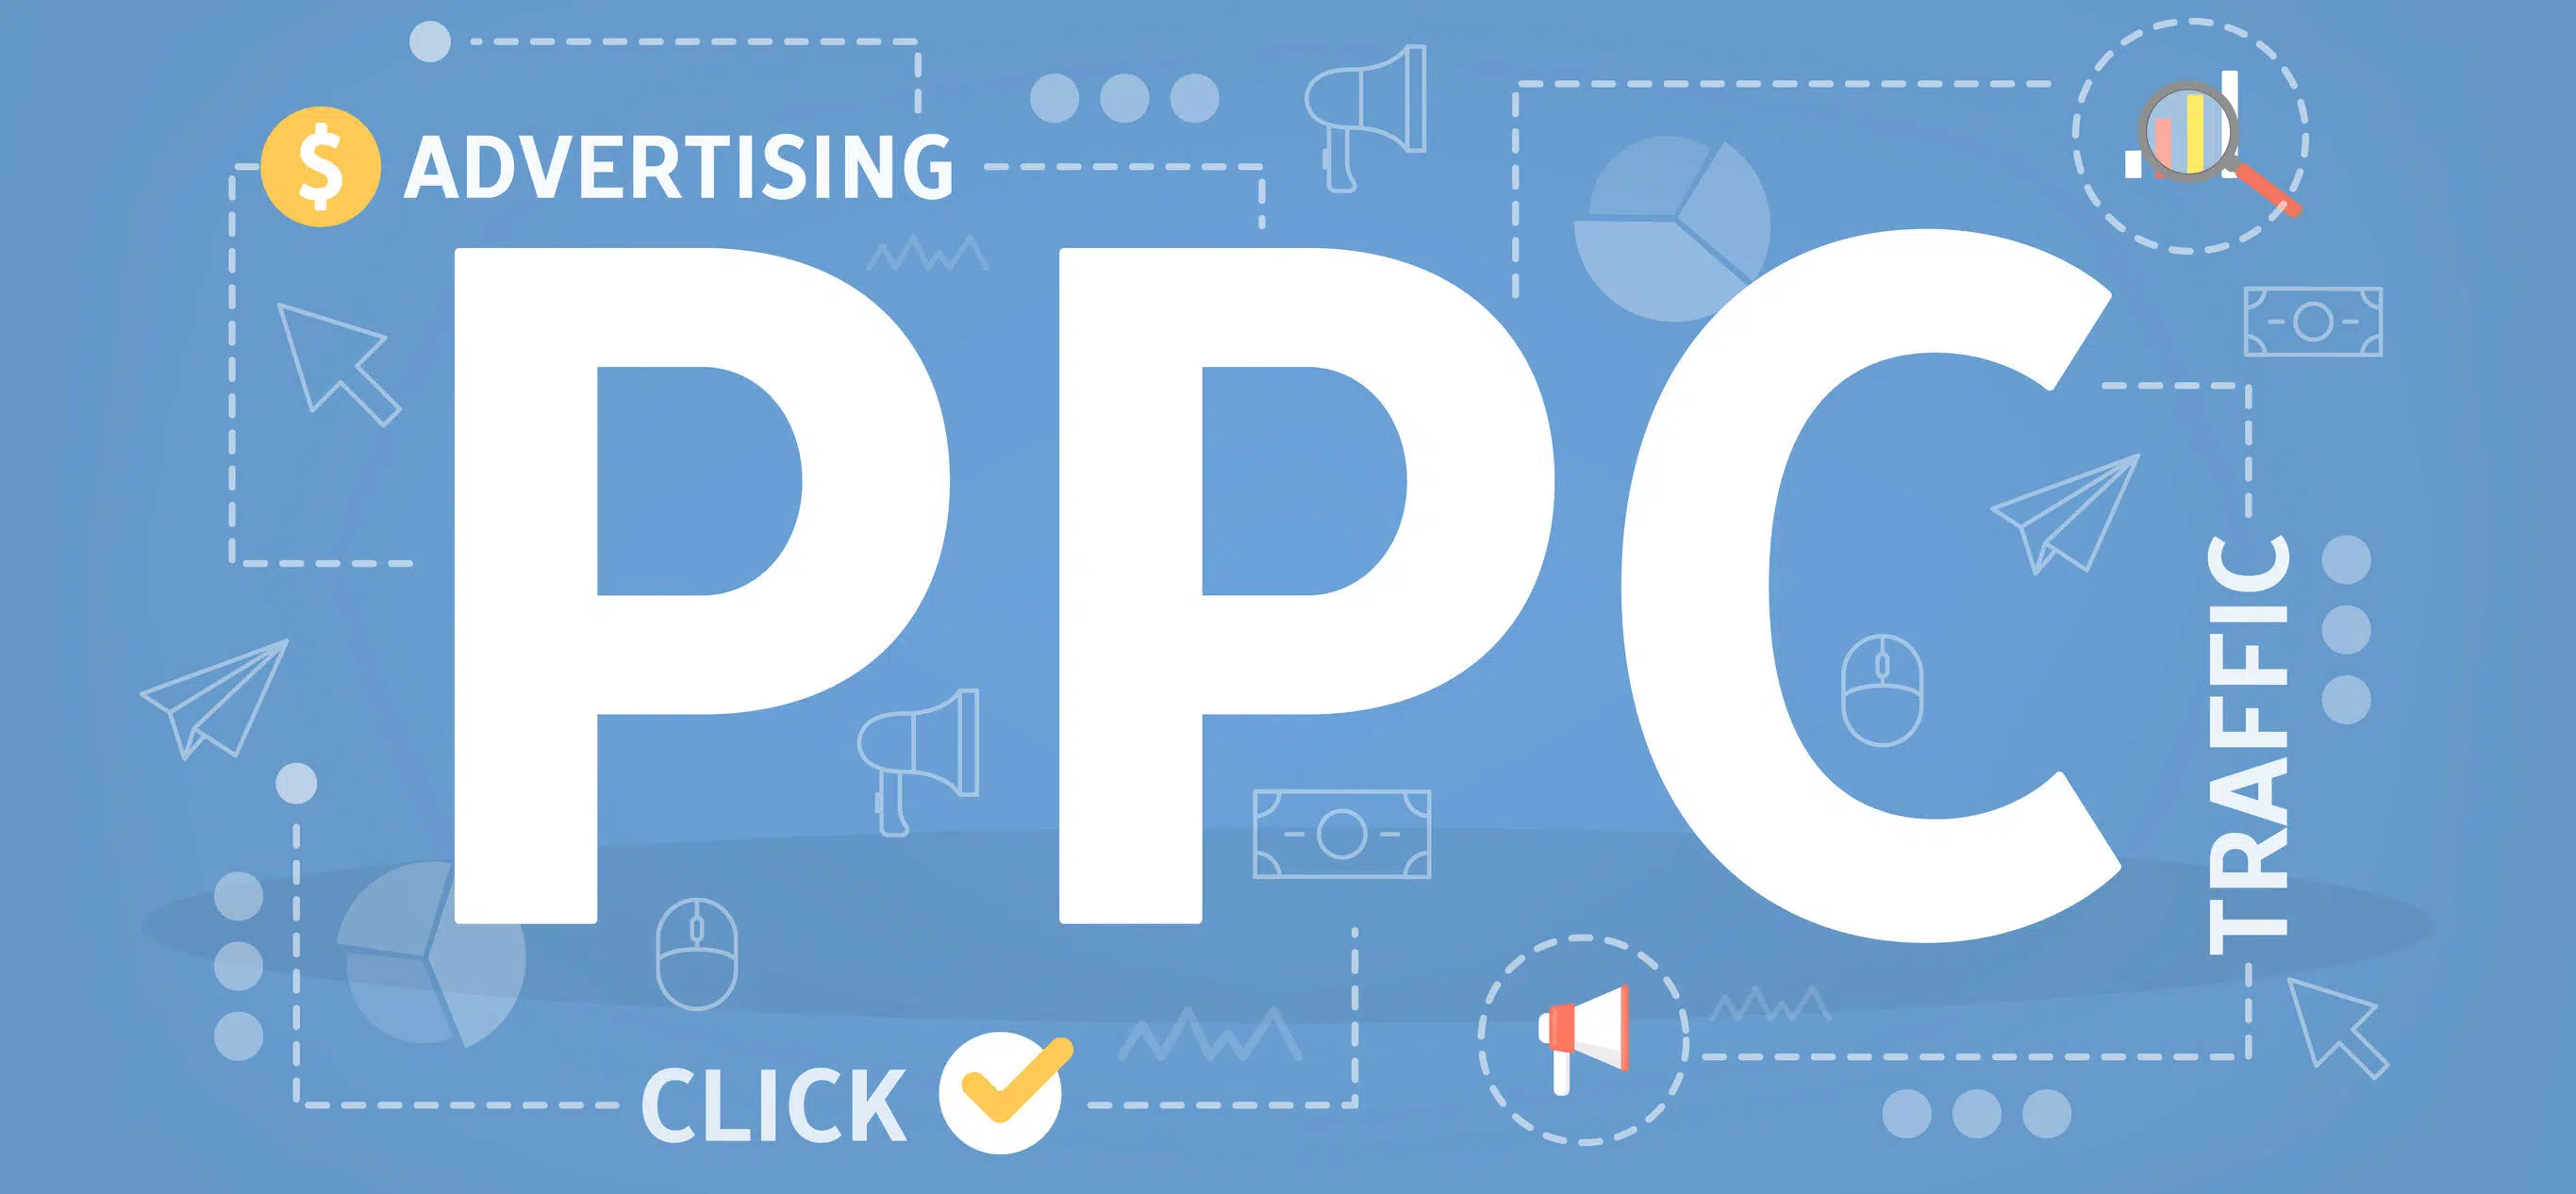 Improve the ROI of your digital advertising and pay per click campaigns